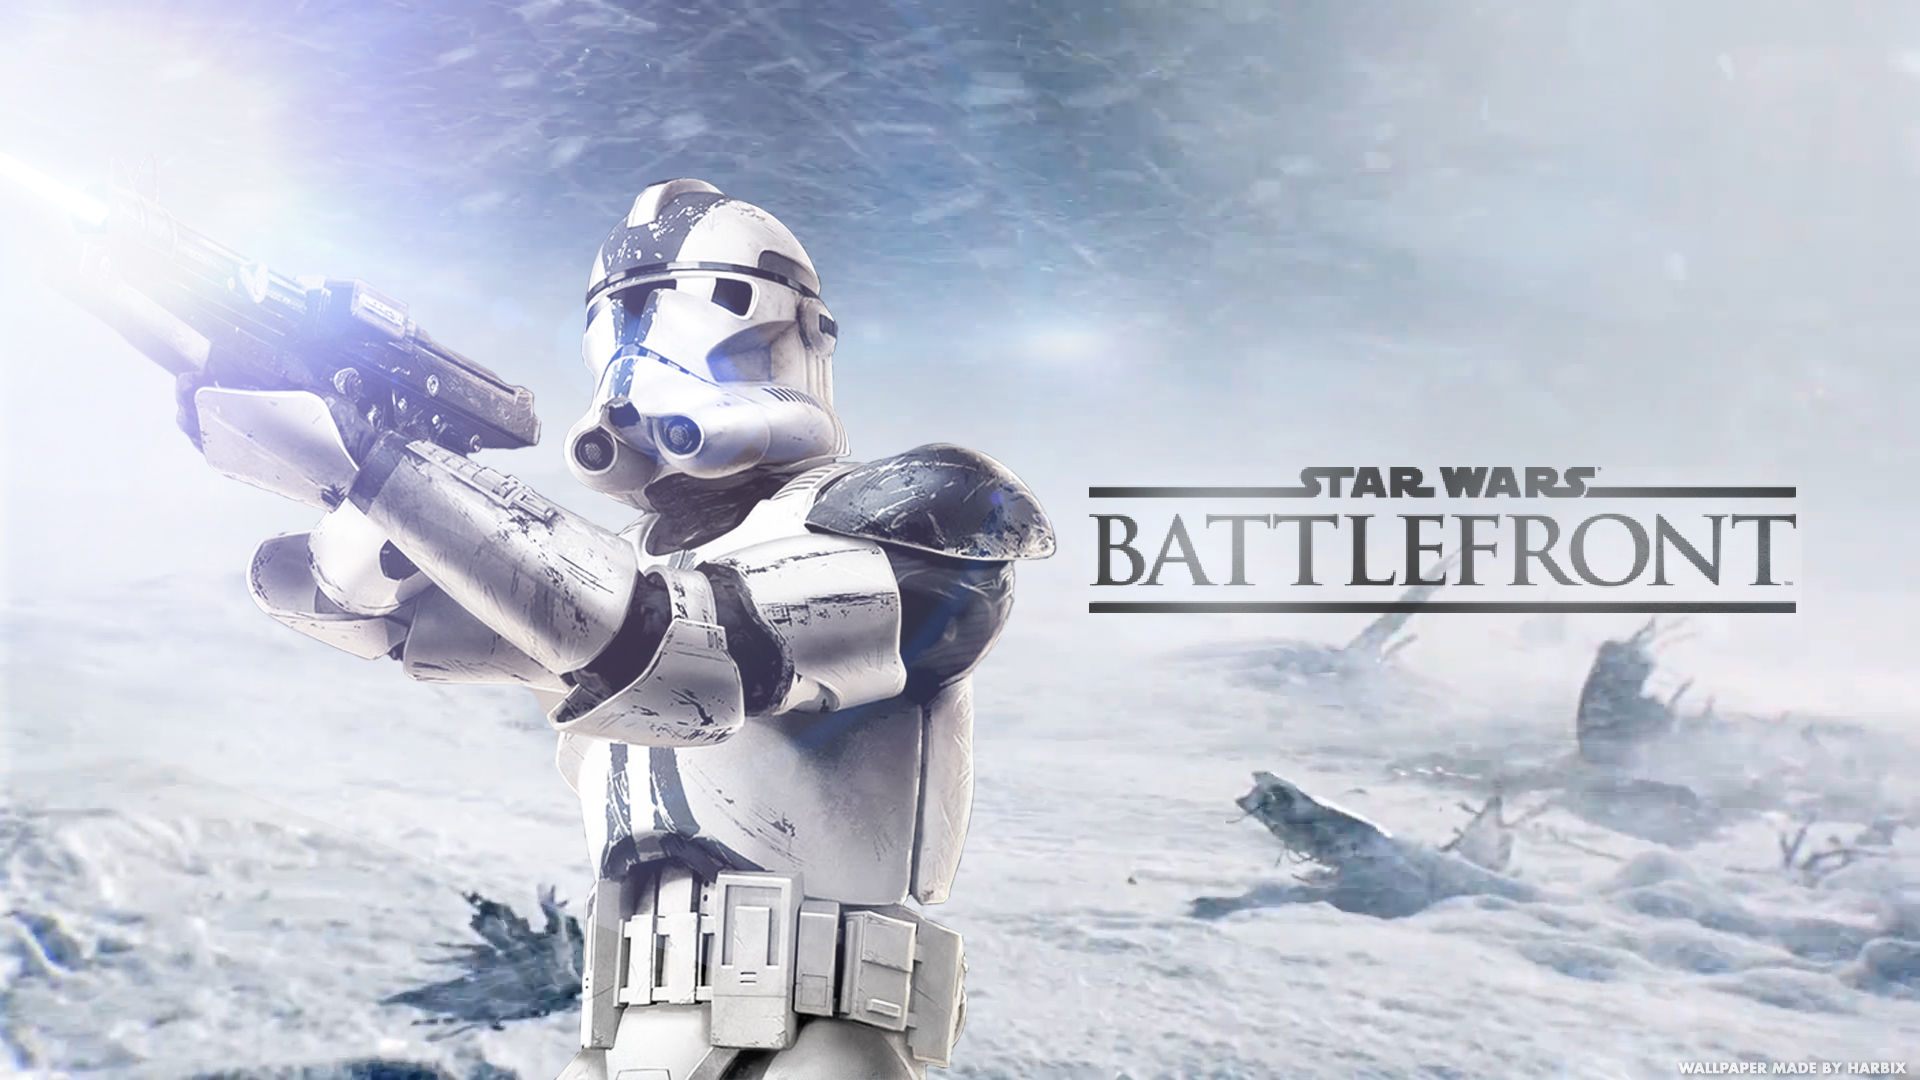 General 1920x1080 Star Wars video games Star Wars: Battlefront blaster PC gaming science fiction clone trooper video game art